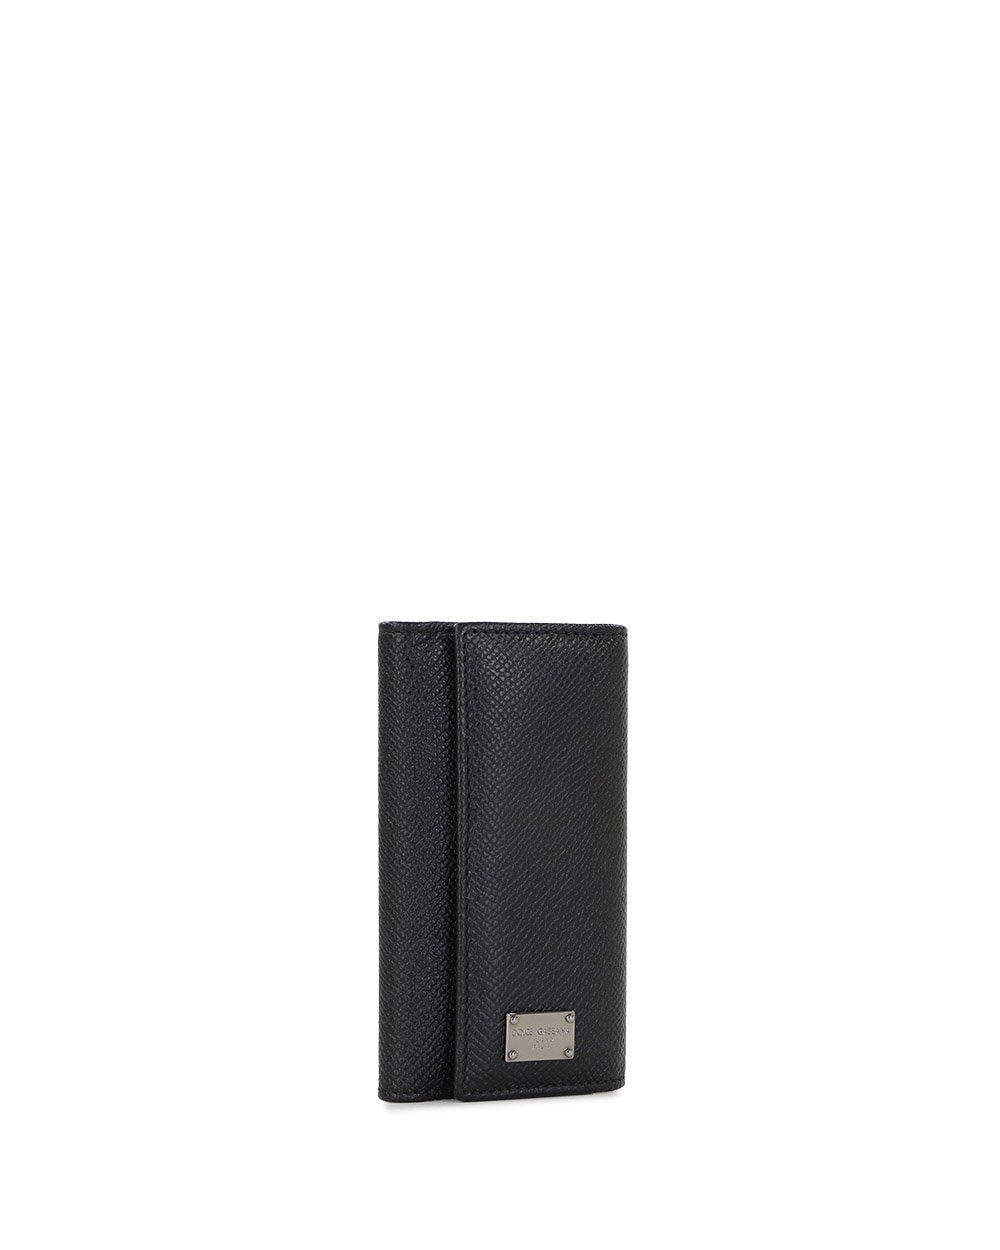 Leather Key Case - ISSI Outlet